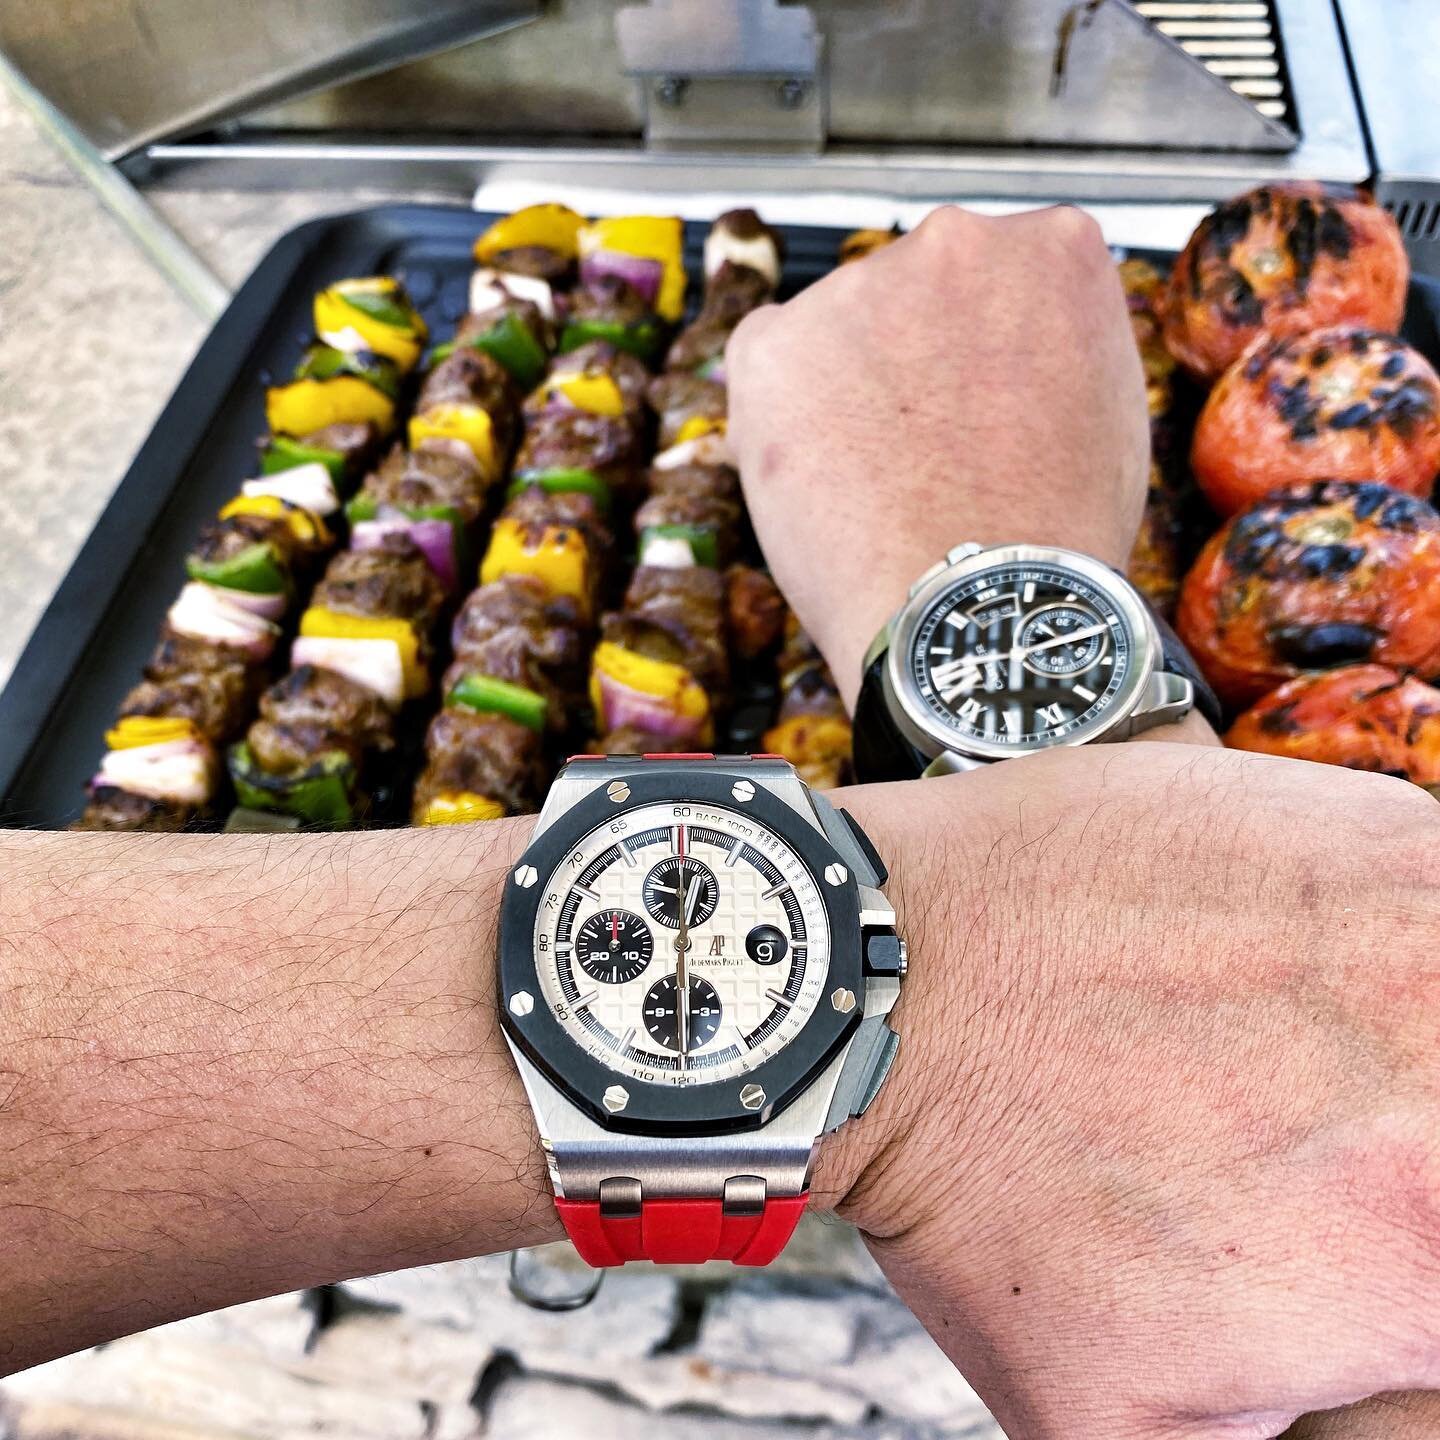 Kabobs 🍢 and watches⌚️.